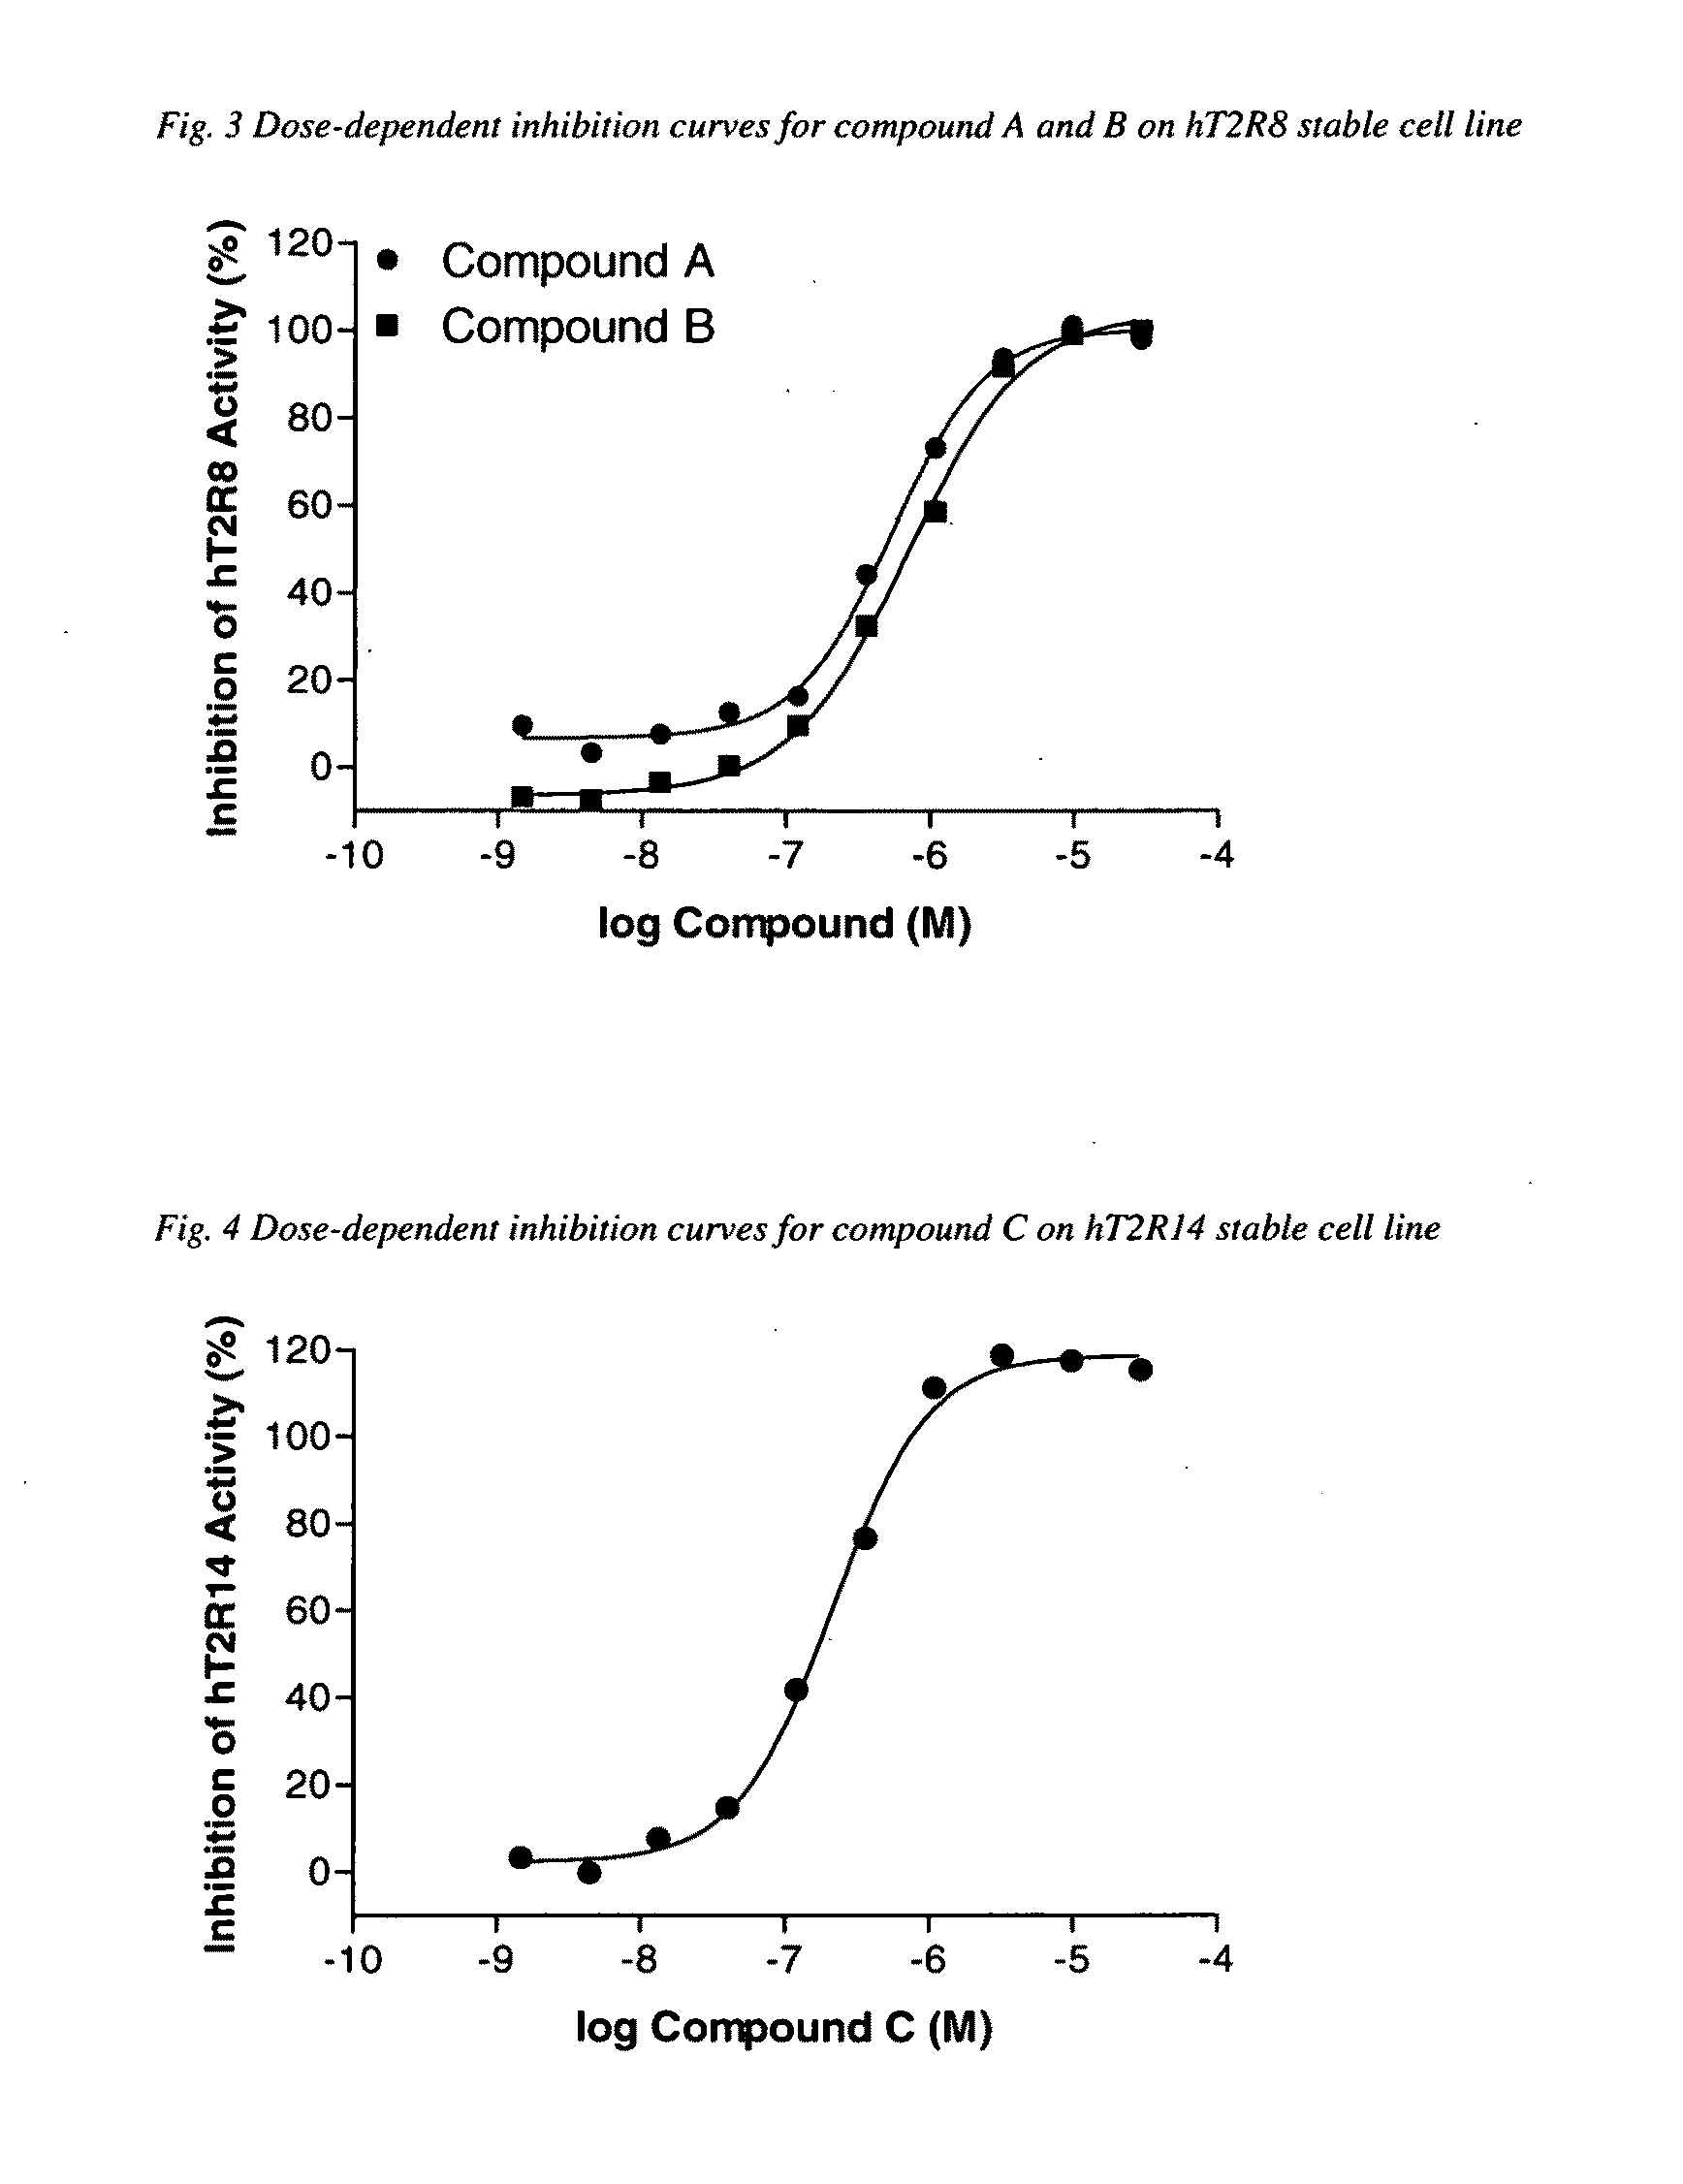 Identification of human T2R receptors that respond to bitter compounds that elicit the bitter taste in compositions, and the use thereof in assays to identify compounds that inhibit (block) bitter taste in compositions and use thereof